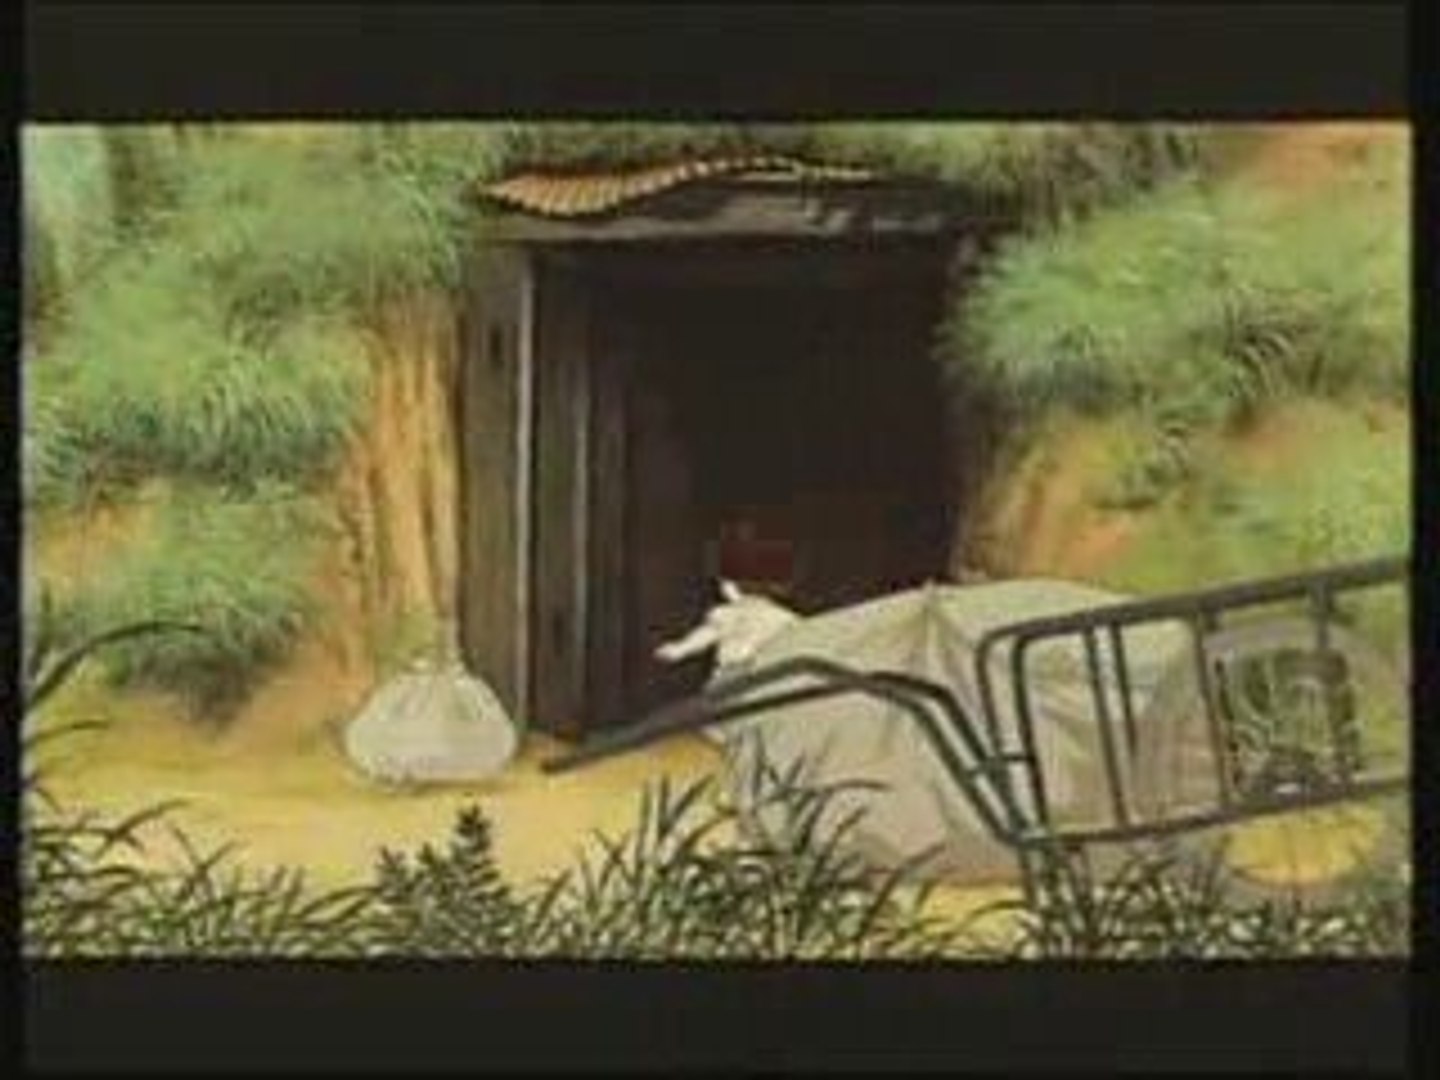 Grave of the Fireflies (1988) Trailer - Dailymotion Video